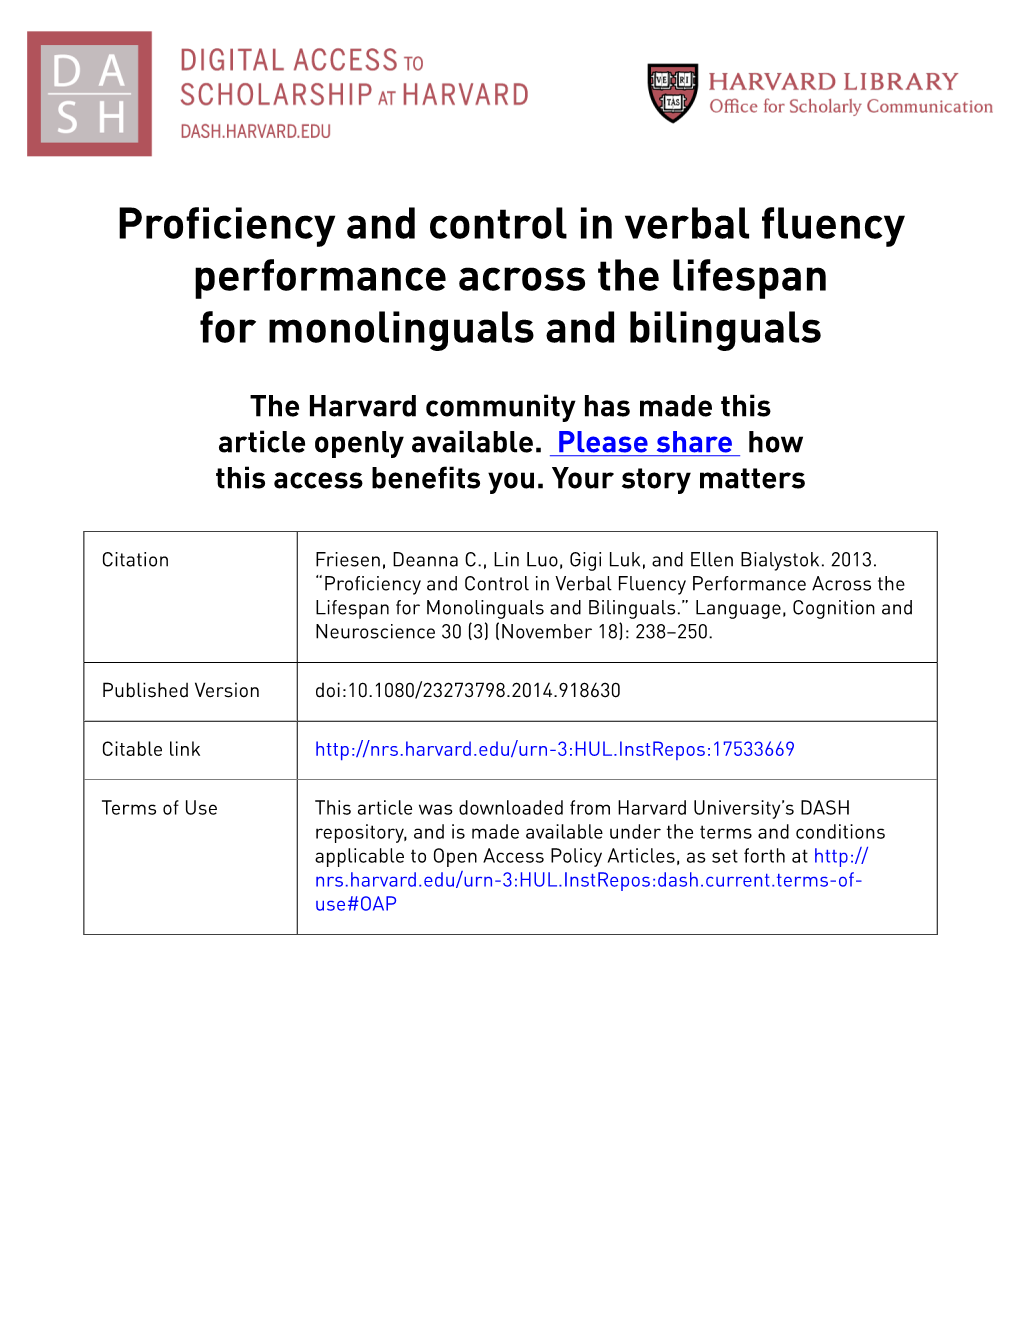 Proficiency and Control in Verbal Fluency Performance Across the Lifespan for Monolinguals and Bilinguals